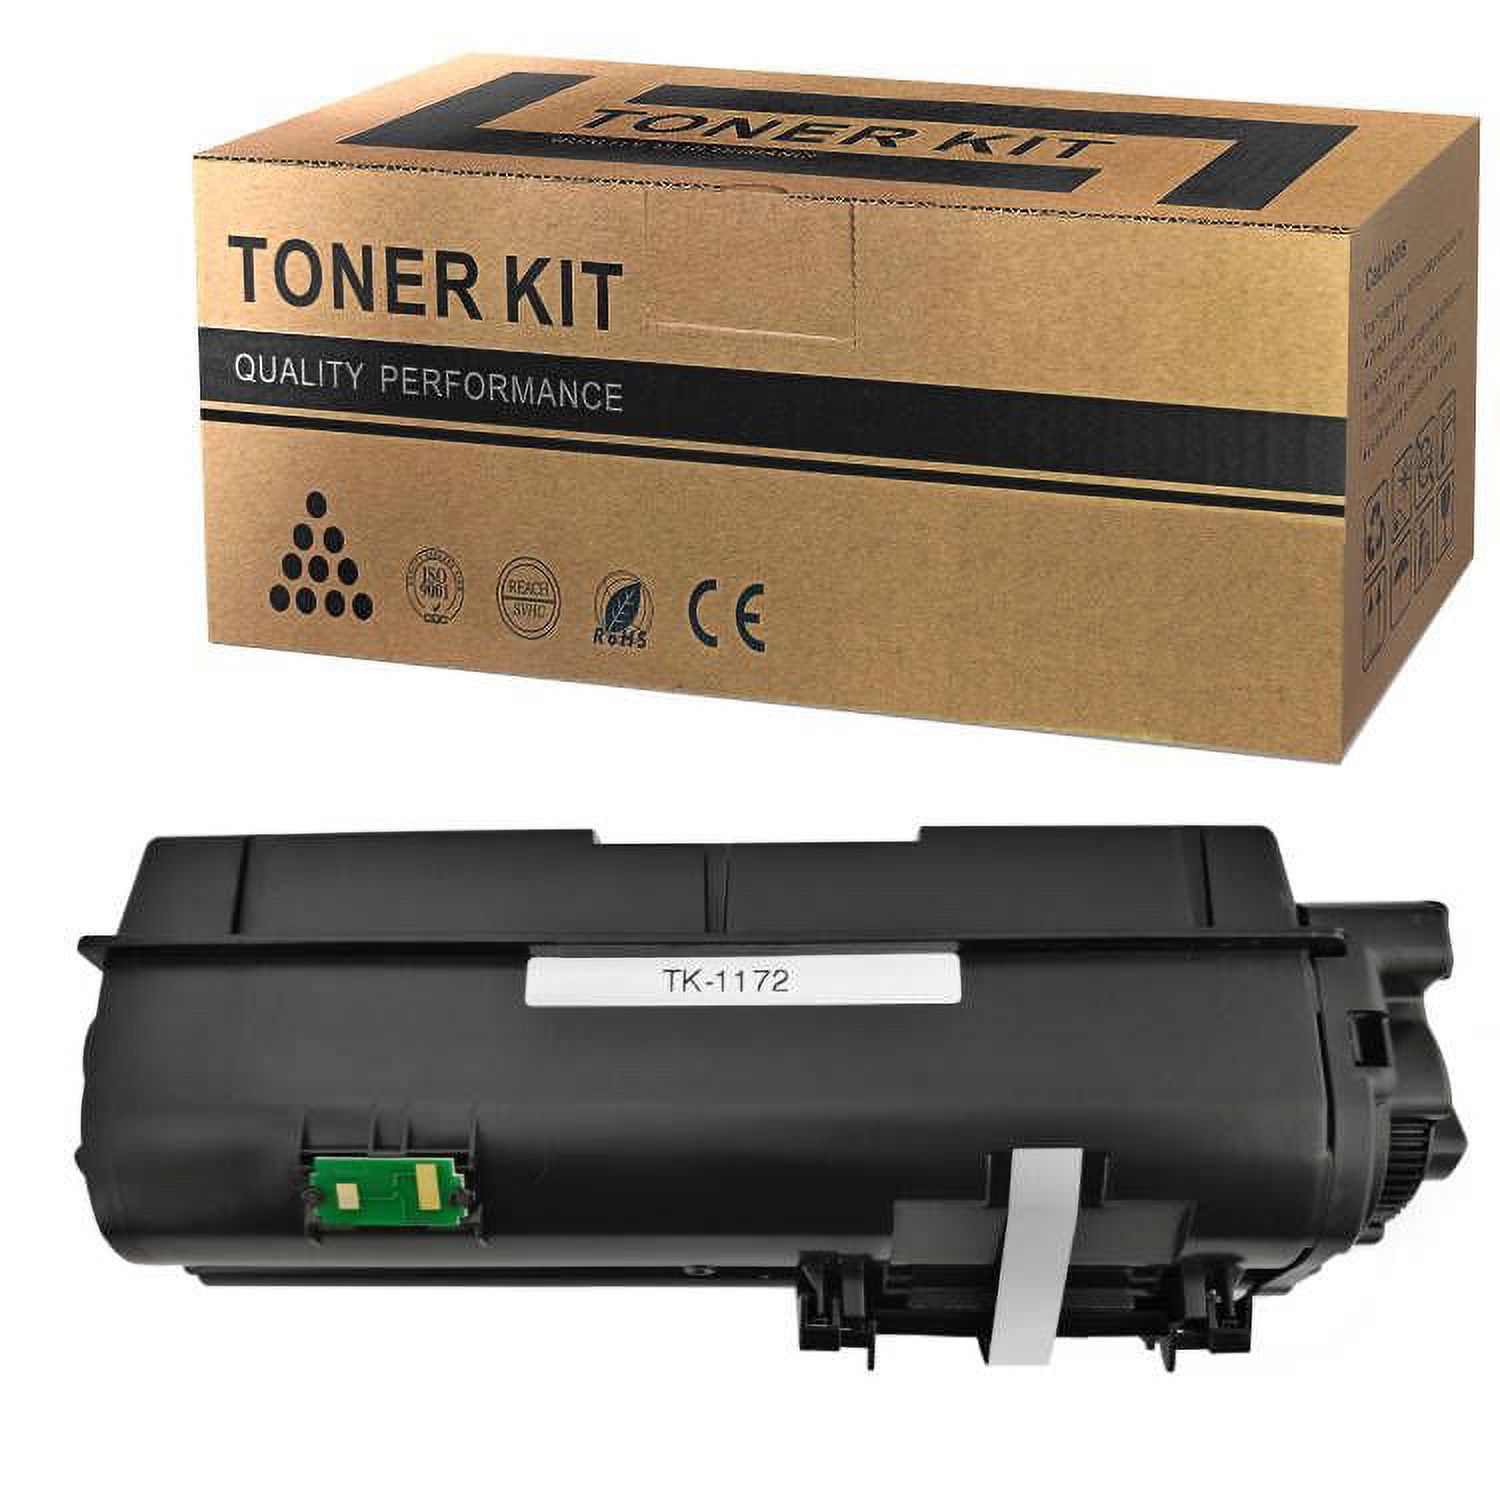 Compatible Toner Cartridge Replacement for TK1172 TK-1172 Black for Kyocera ECOSYS M2040dn M2540dn M2640idw Laser Printers - image 1 of 5